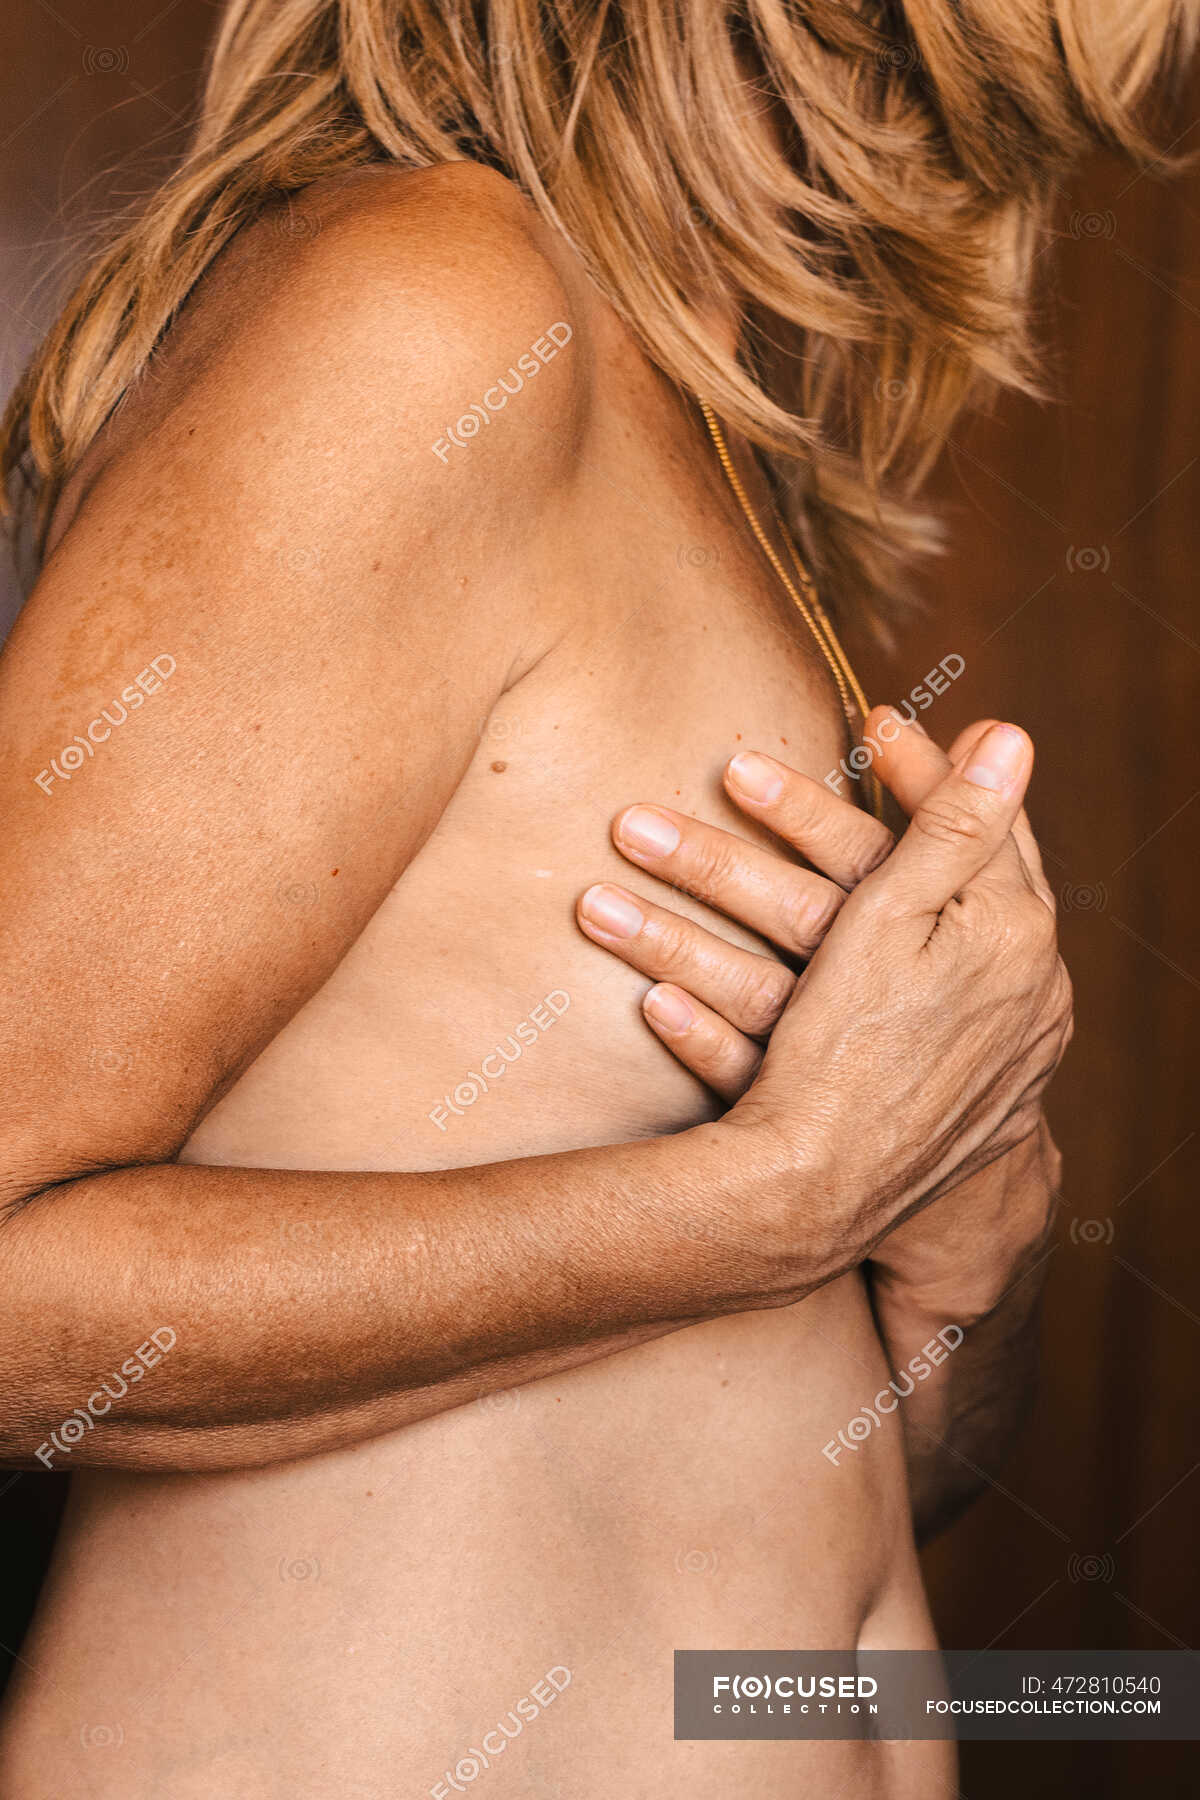 Naked Boobs Close Up Selfies - Close-up of a nude senior woman touching her breast â€” 60s, prevention -  Stock Photo | #472810540